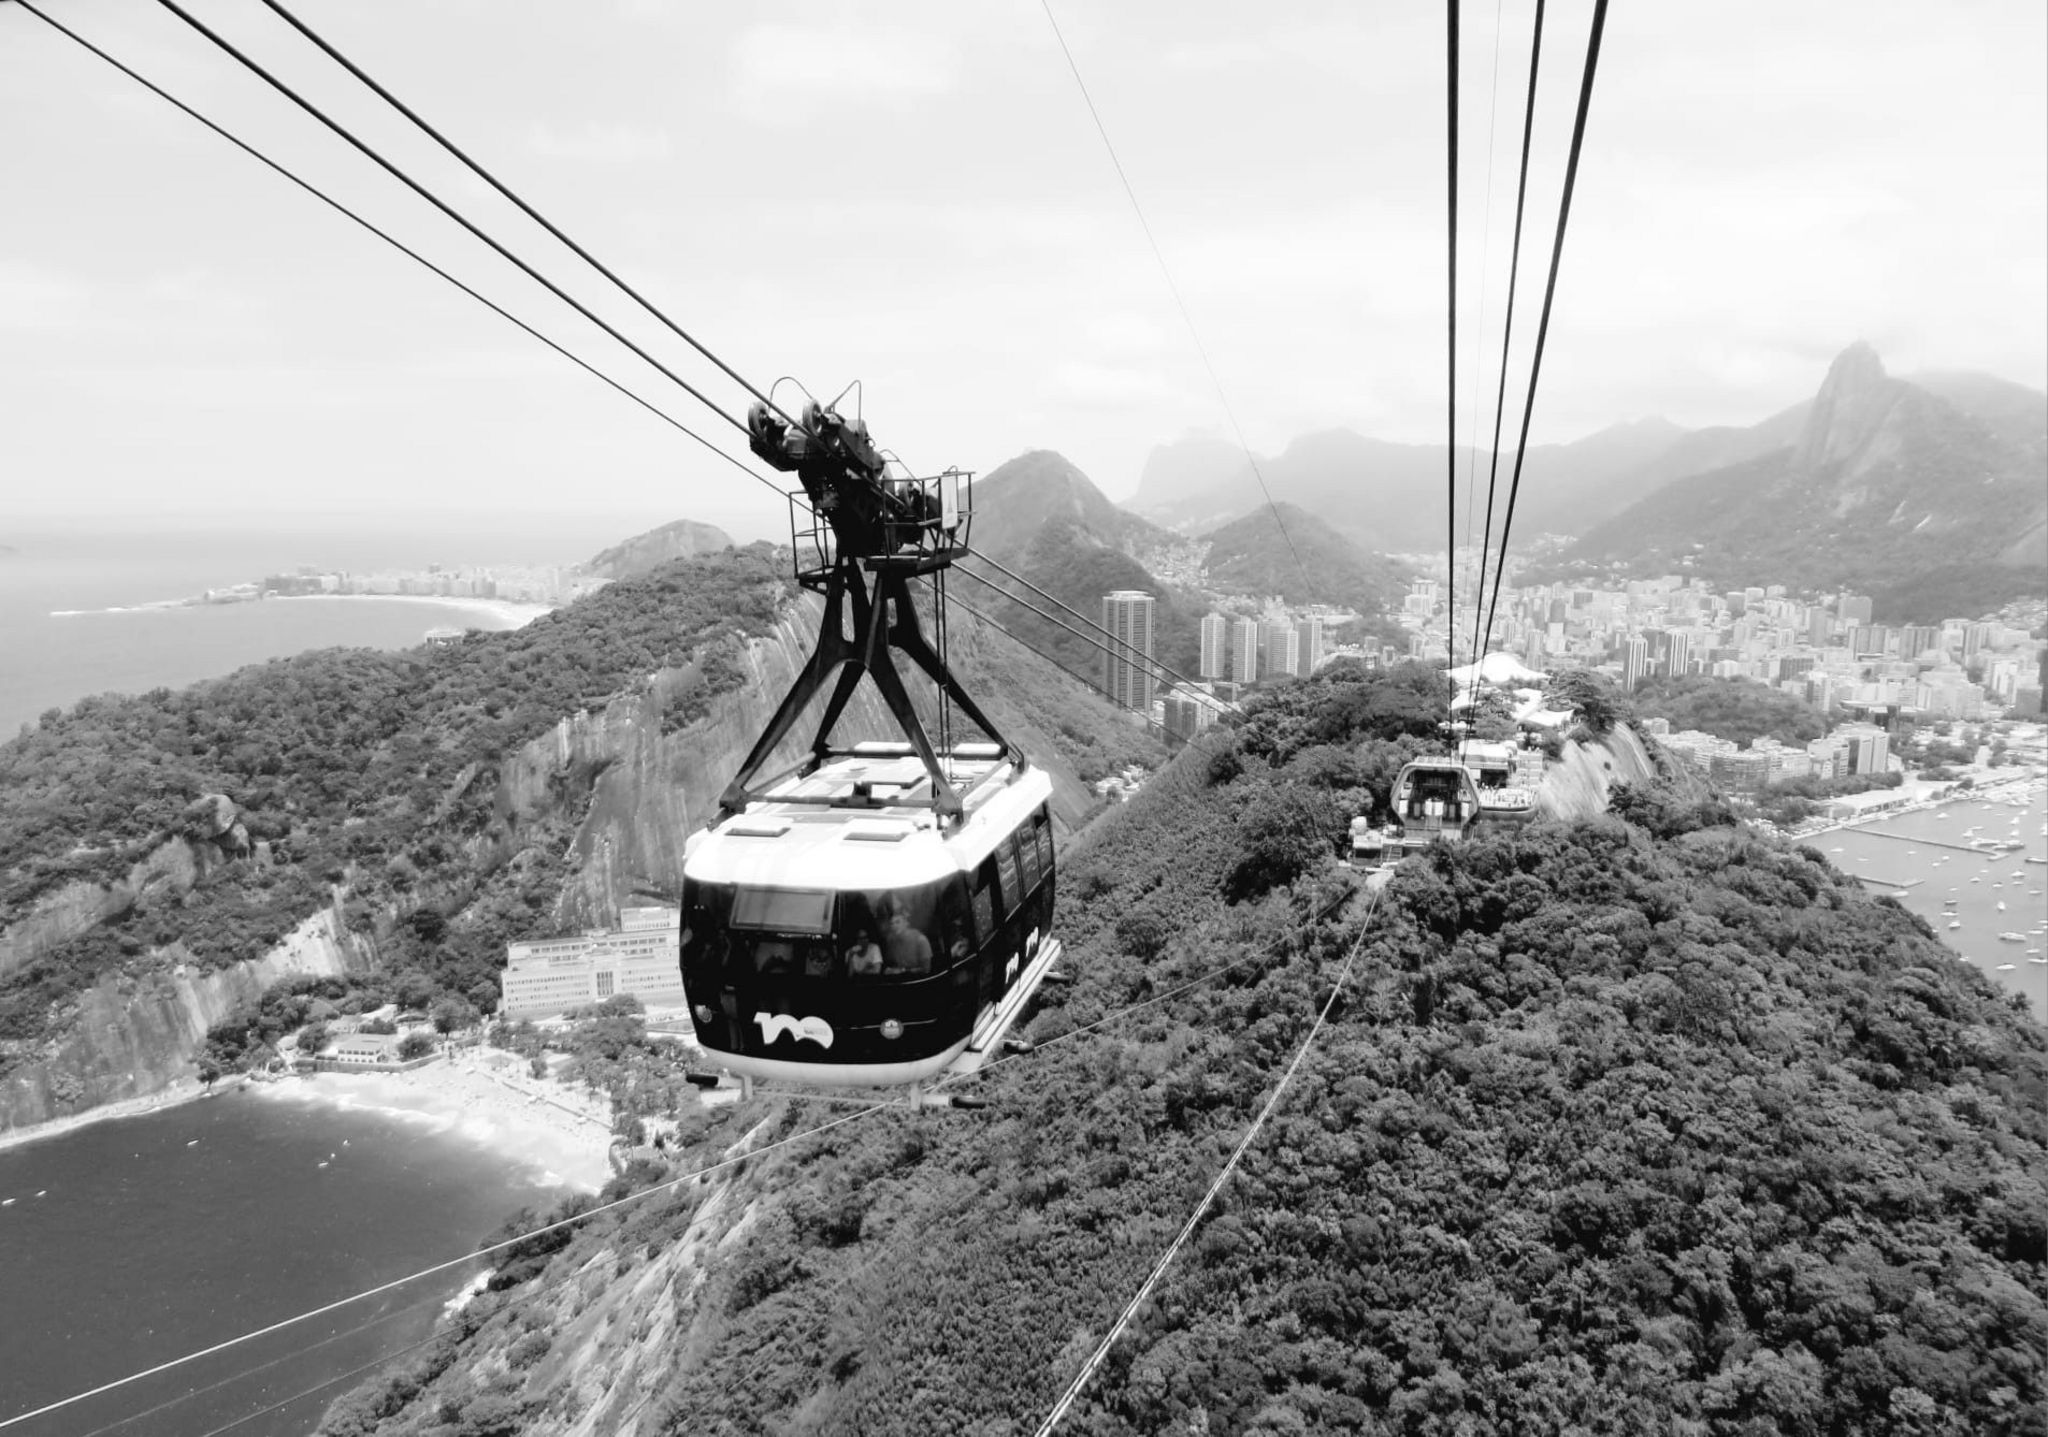 A cable car travelling between the city of Rio de Janeiro and Sugarloaf Mountain